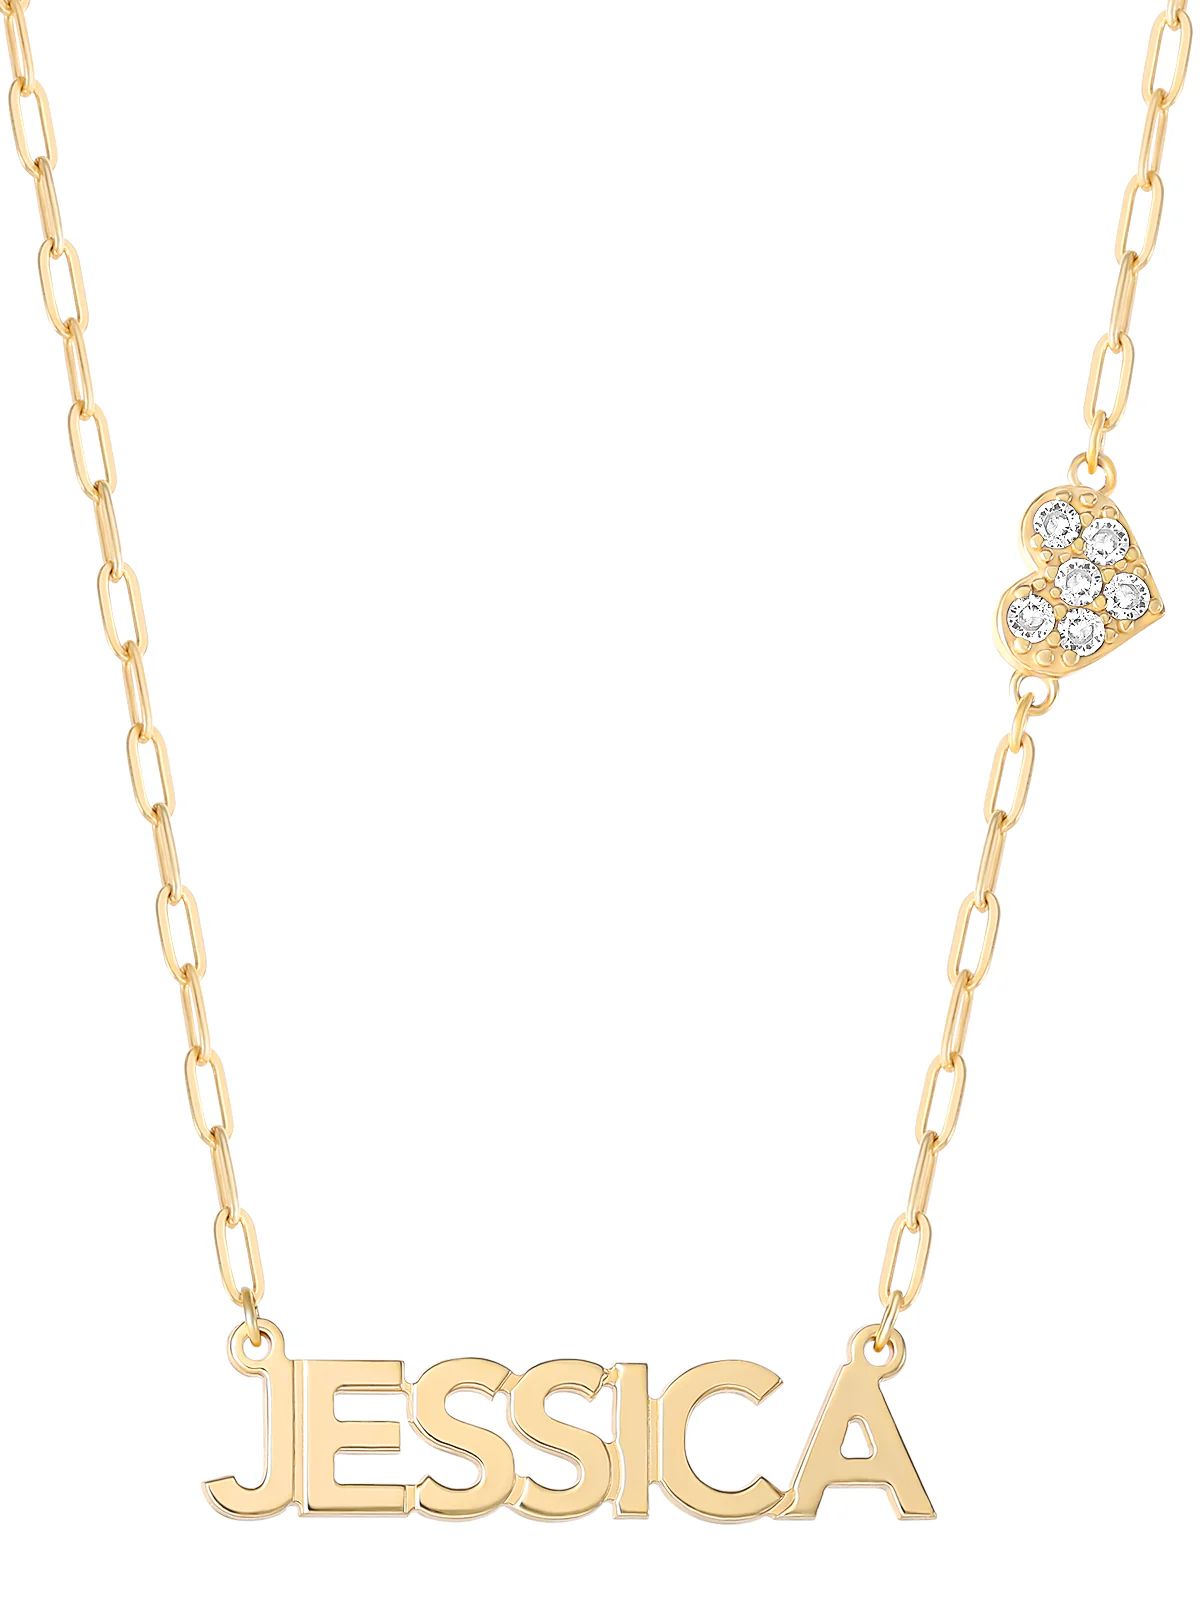 Personalized Necklace with Pavé Cubic Zirconia Charm | Jessica Simpson E Commerce